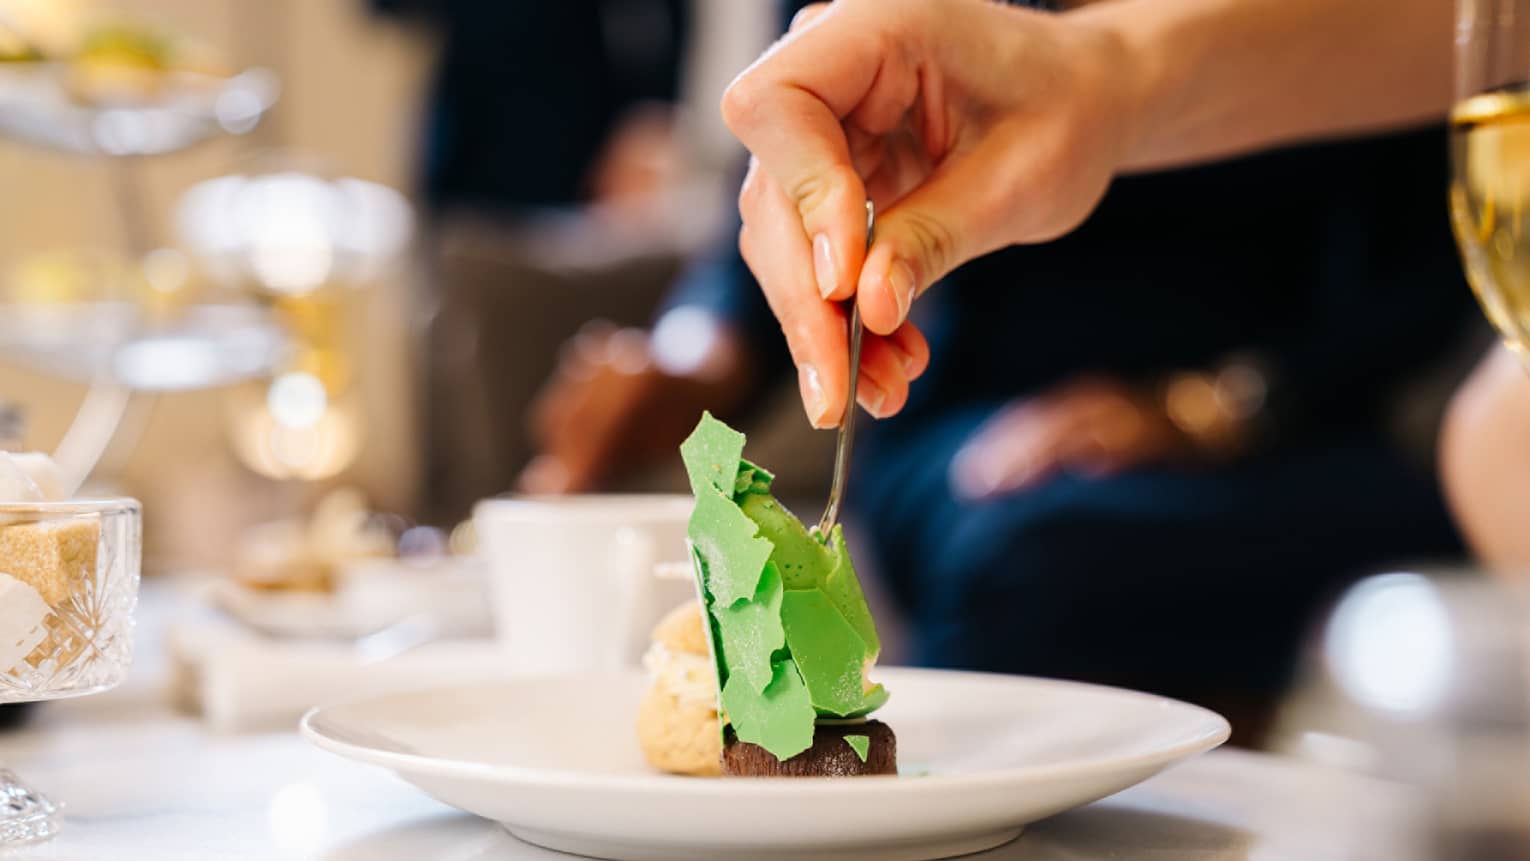 A person putting a fork into a small pastry during afternoon tea.